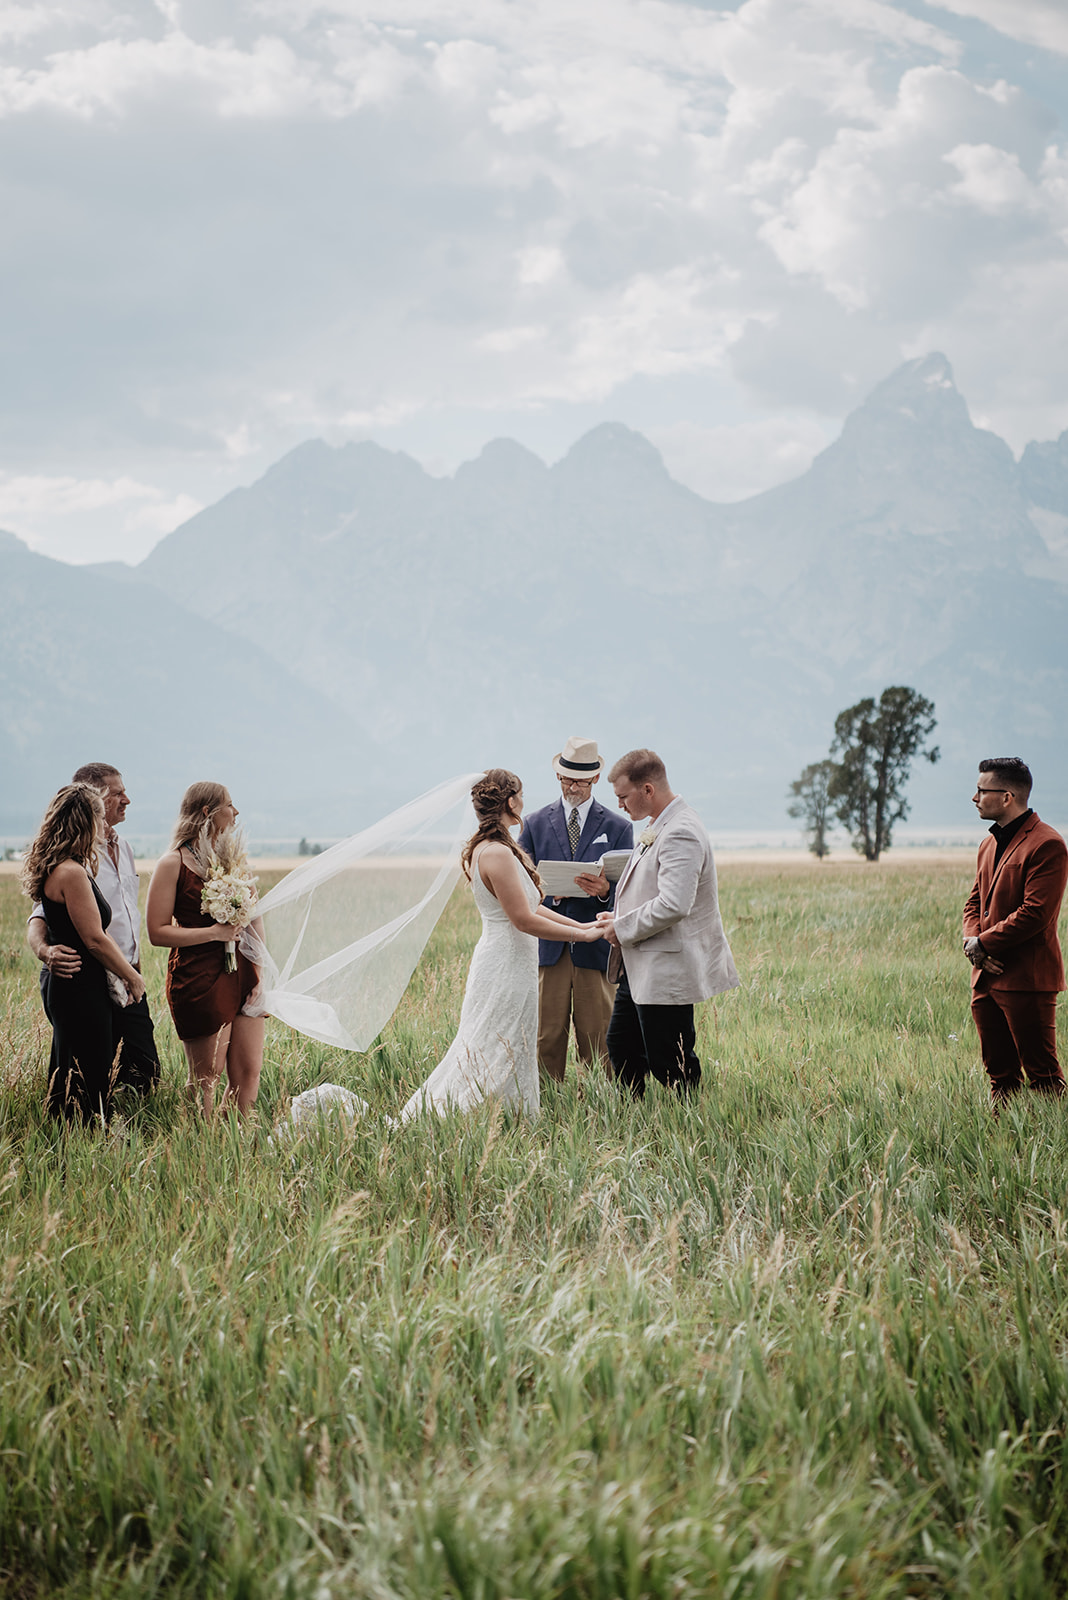 Jackson hole elopement photographer captures outdoor wedding ceremony in the Grand Tetons with bride and groom in a field together